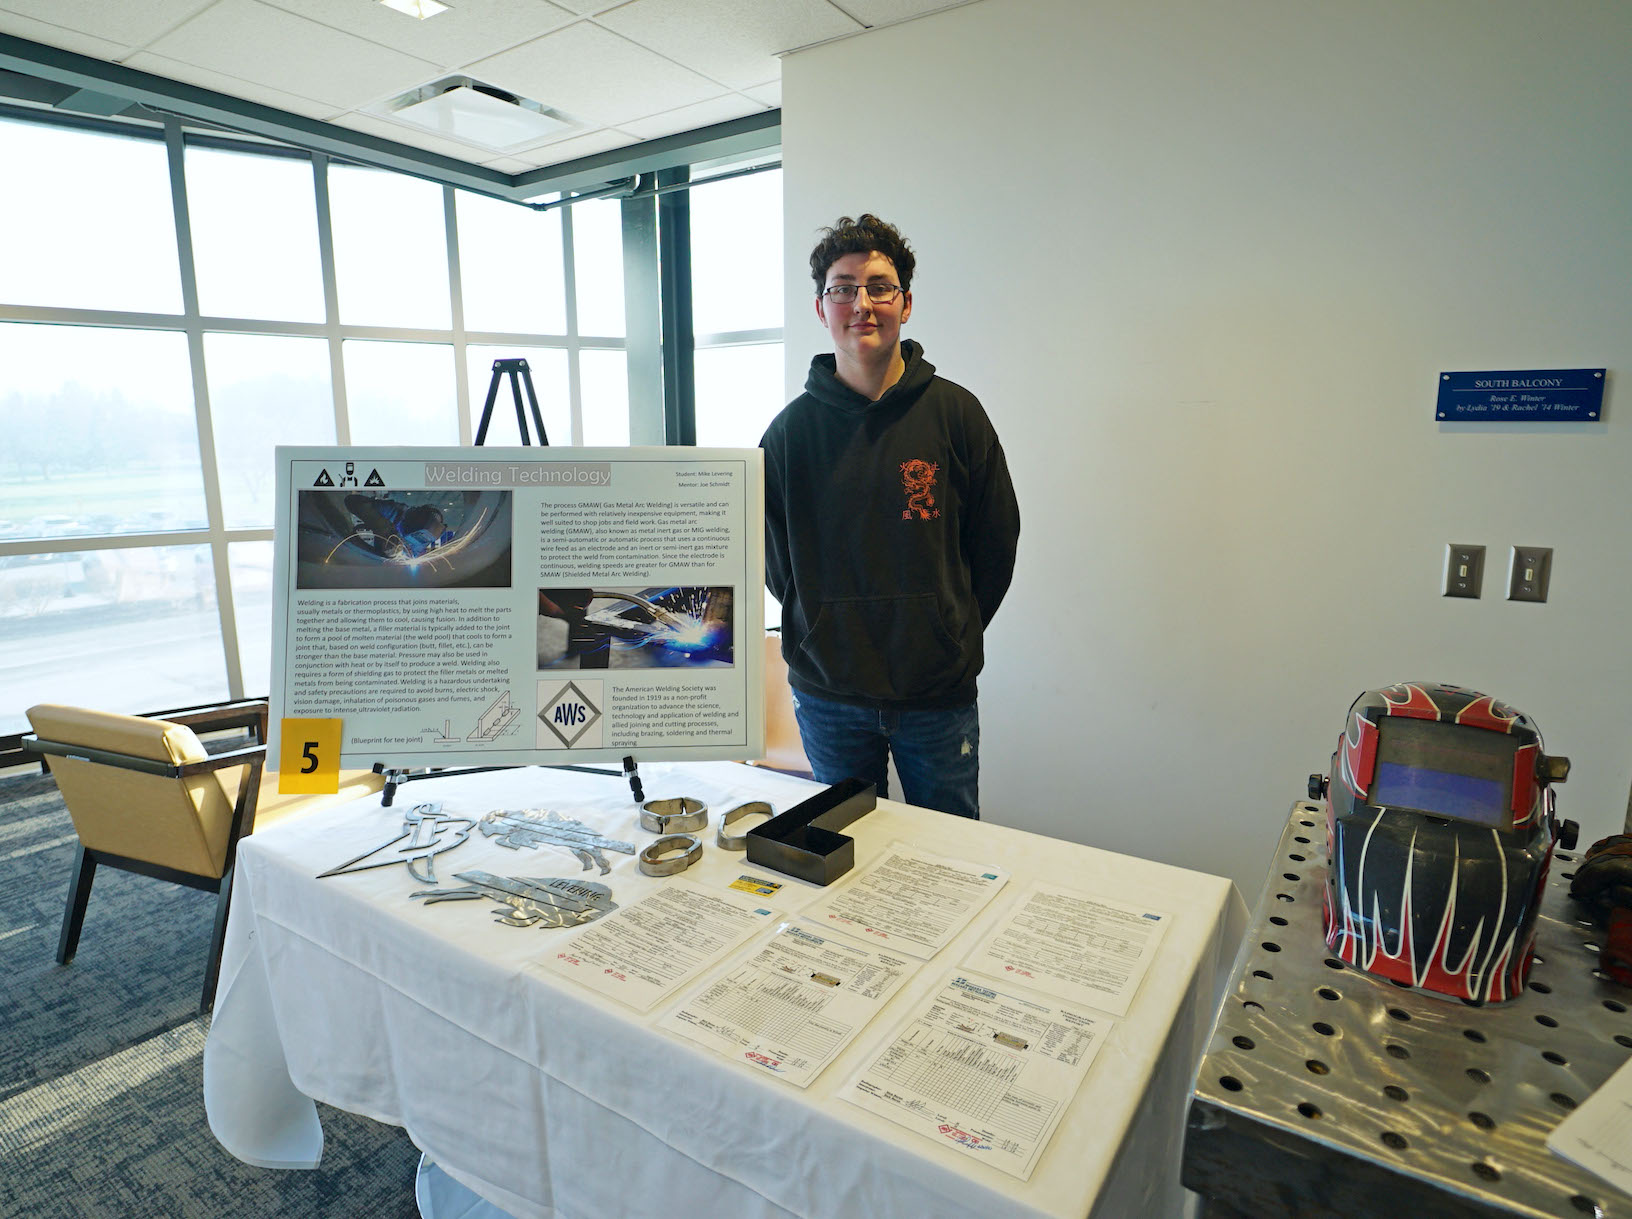 2022 showcase presenter and welding student Michael Levering presents sports memorabilia and other creations he made with welding tools and techniques. (Submitted photo)